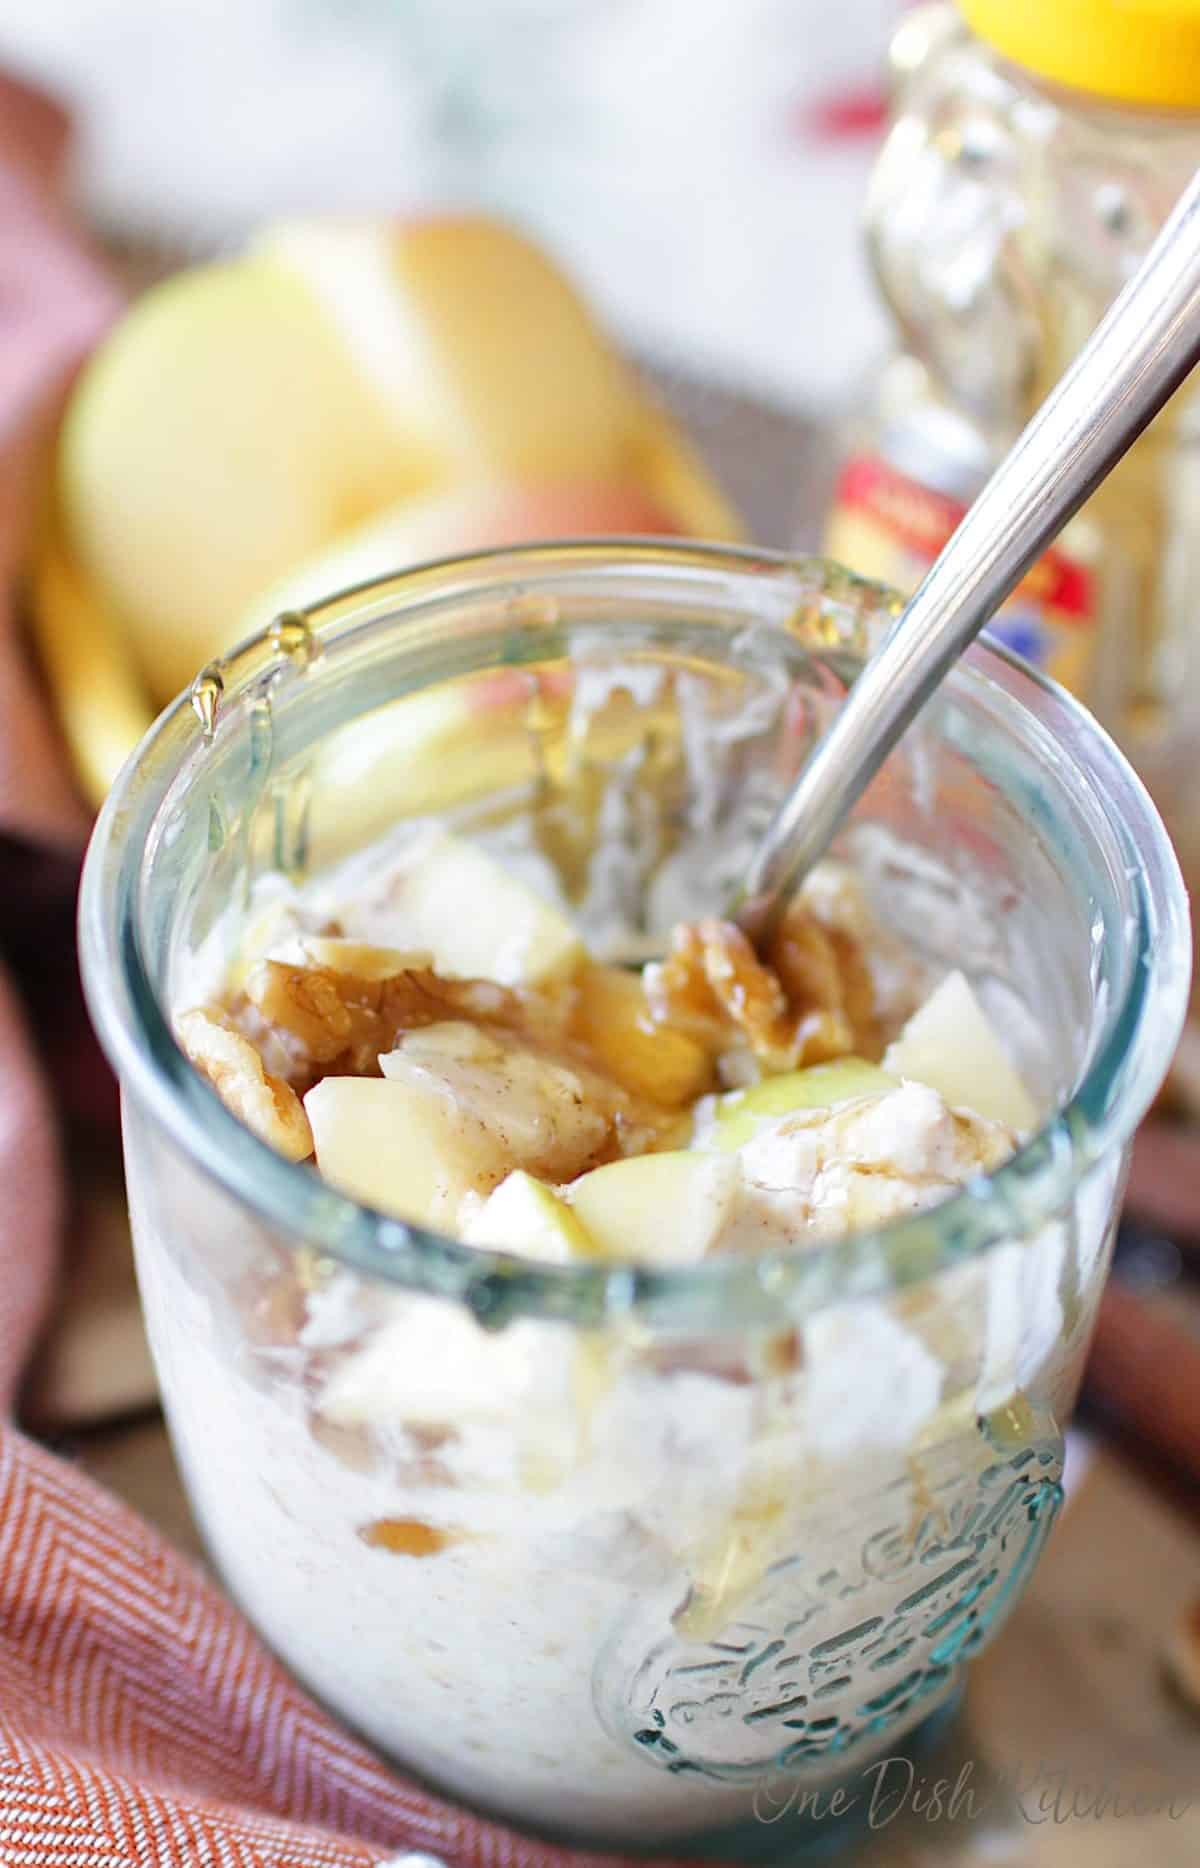 A closeup picture of a jar of overnight oats with a spoon and honey drizzled over the top.